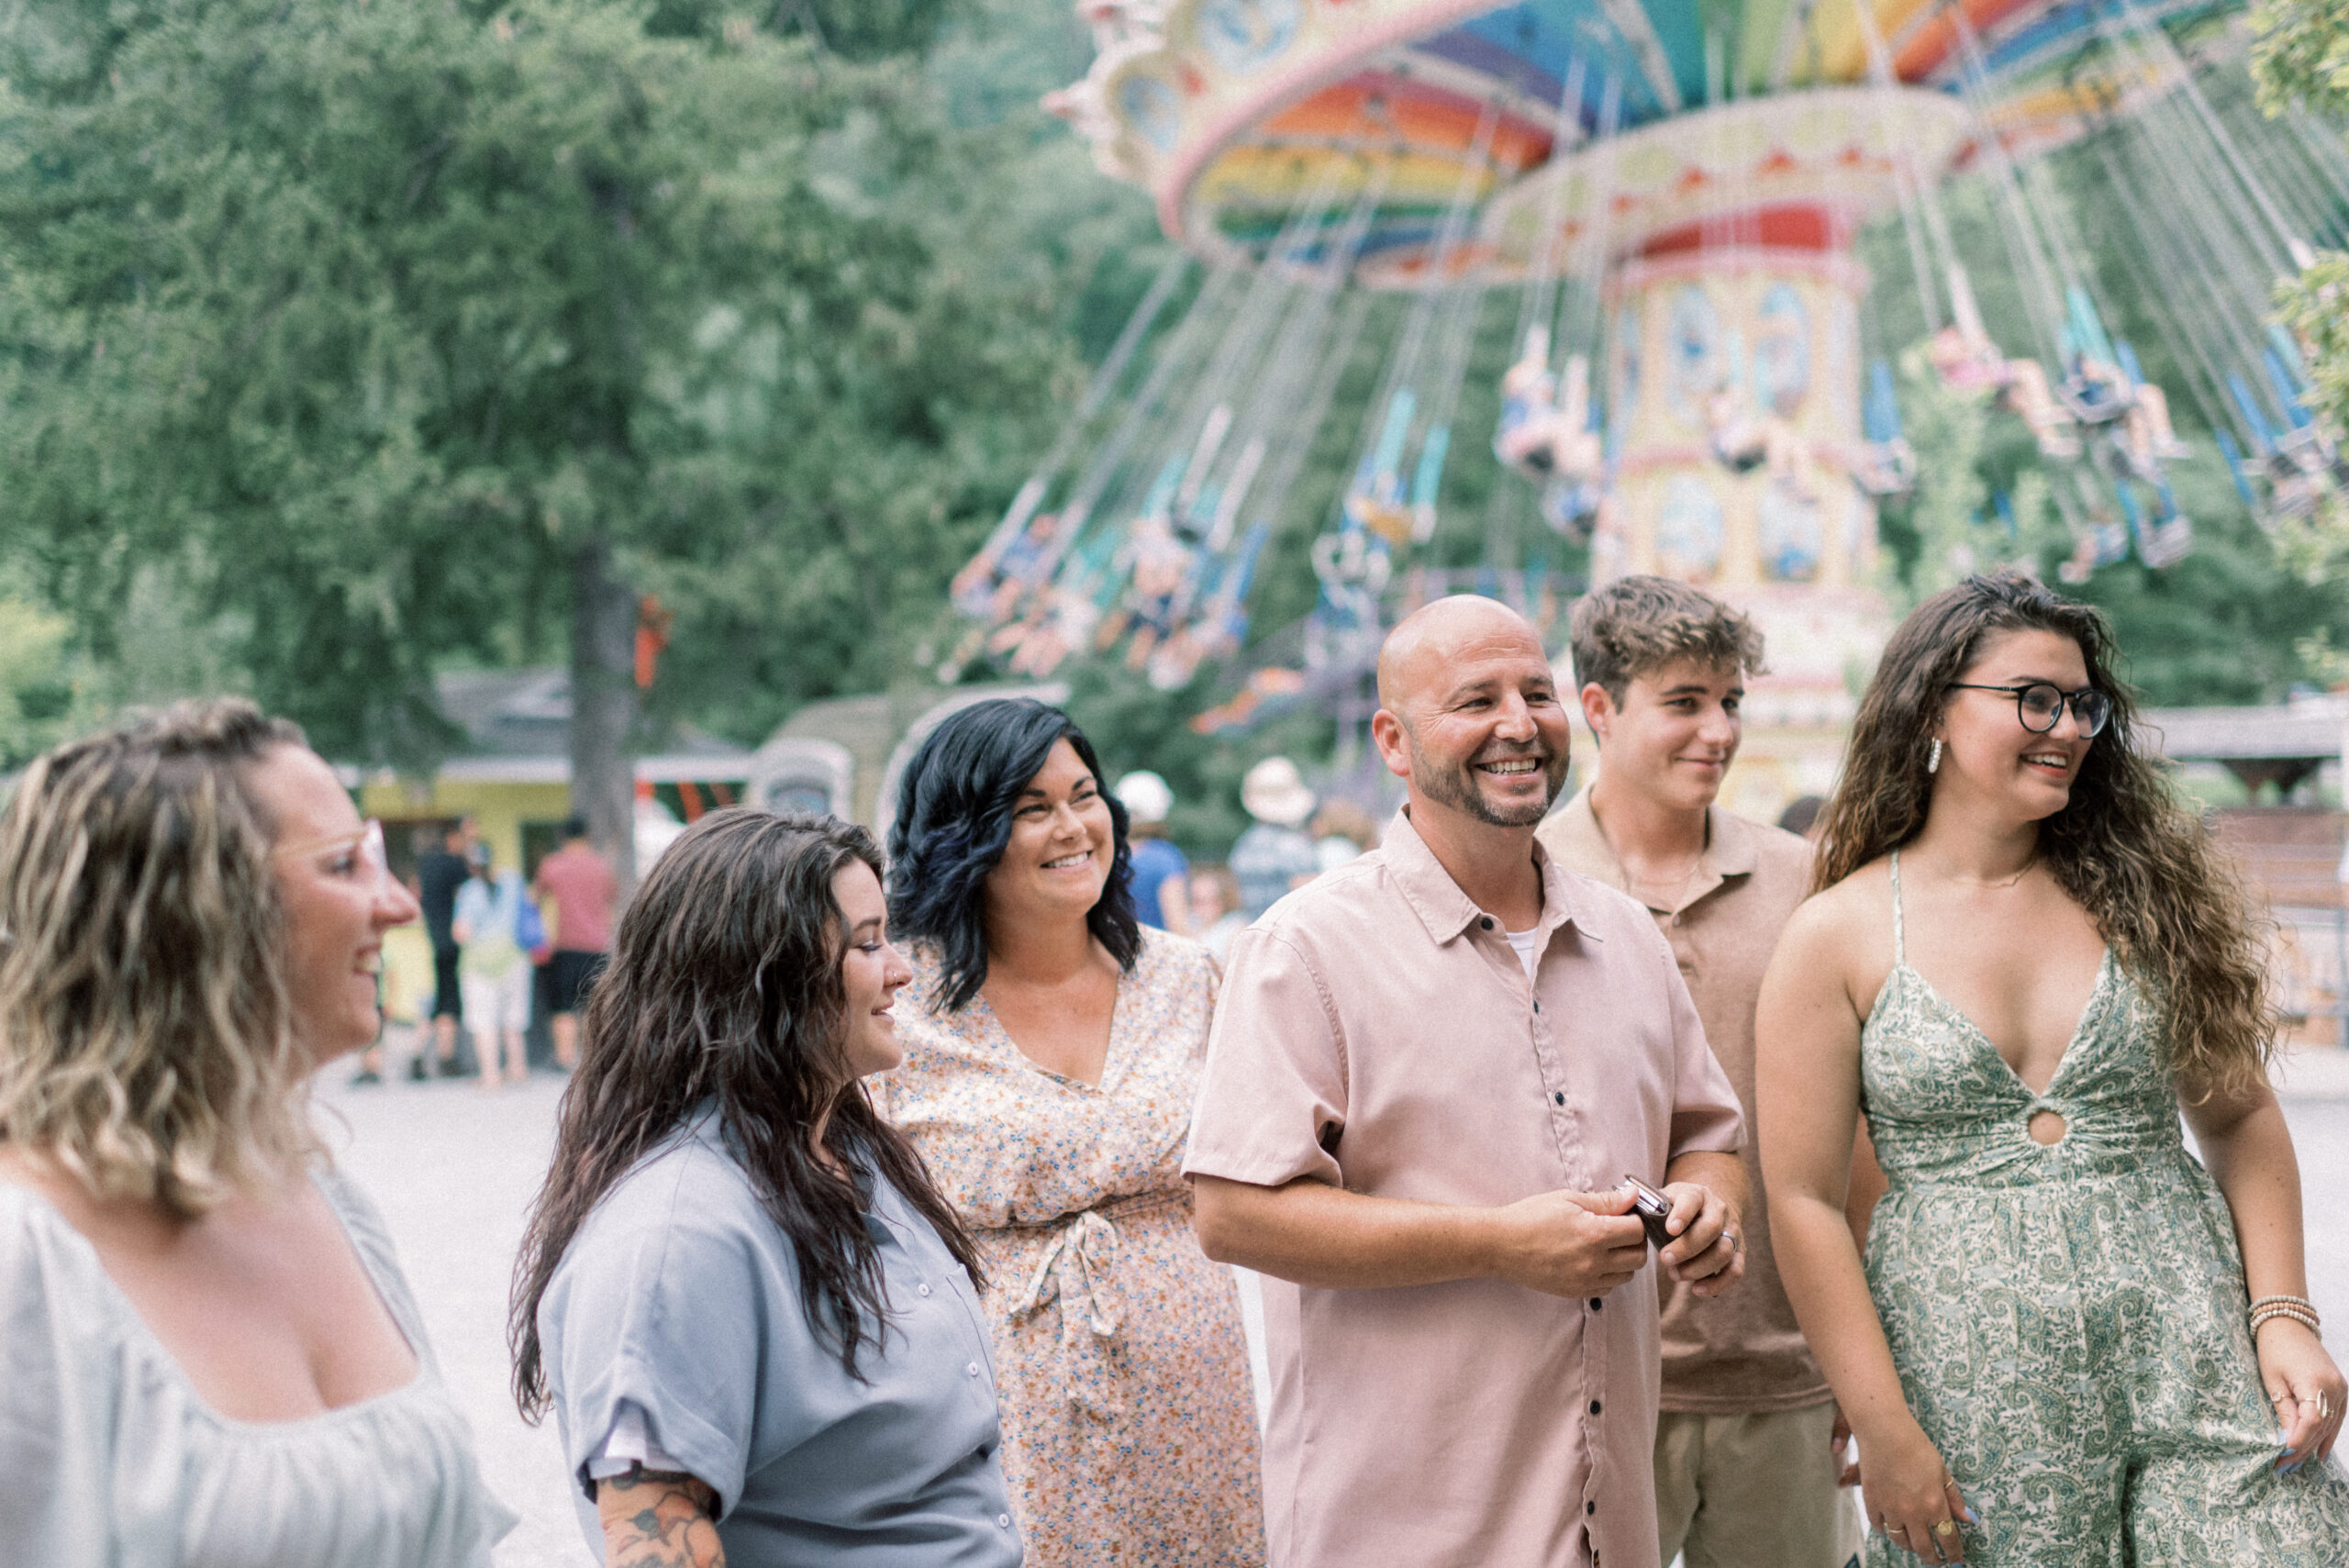 Maryland wedding photographer captures family having fun together and laughing